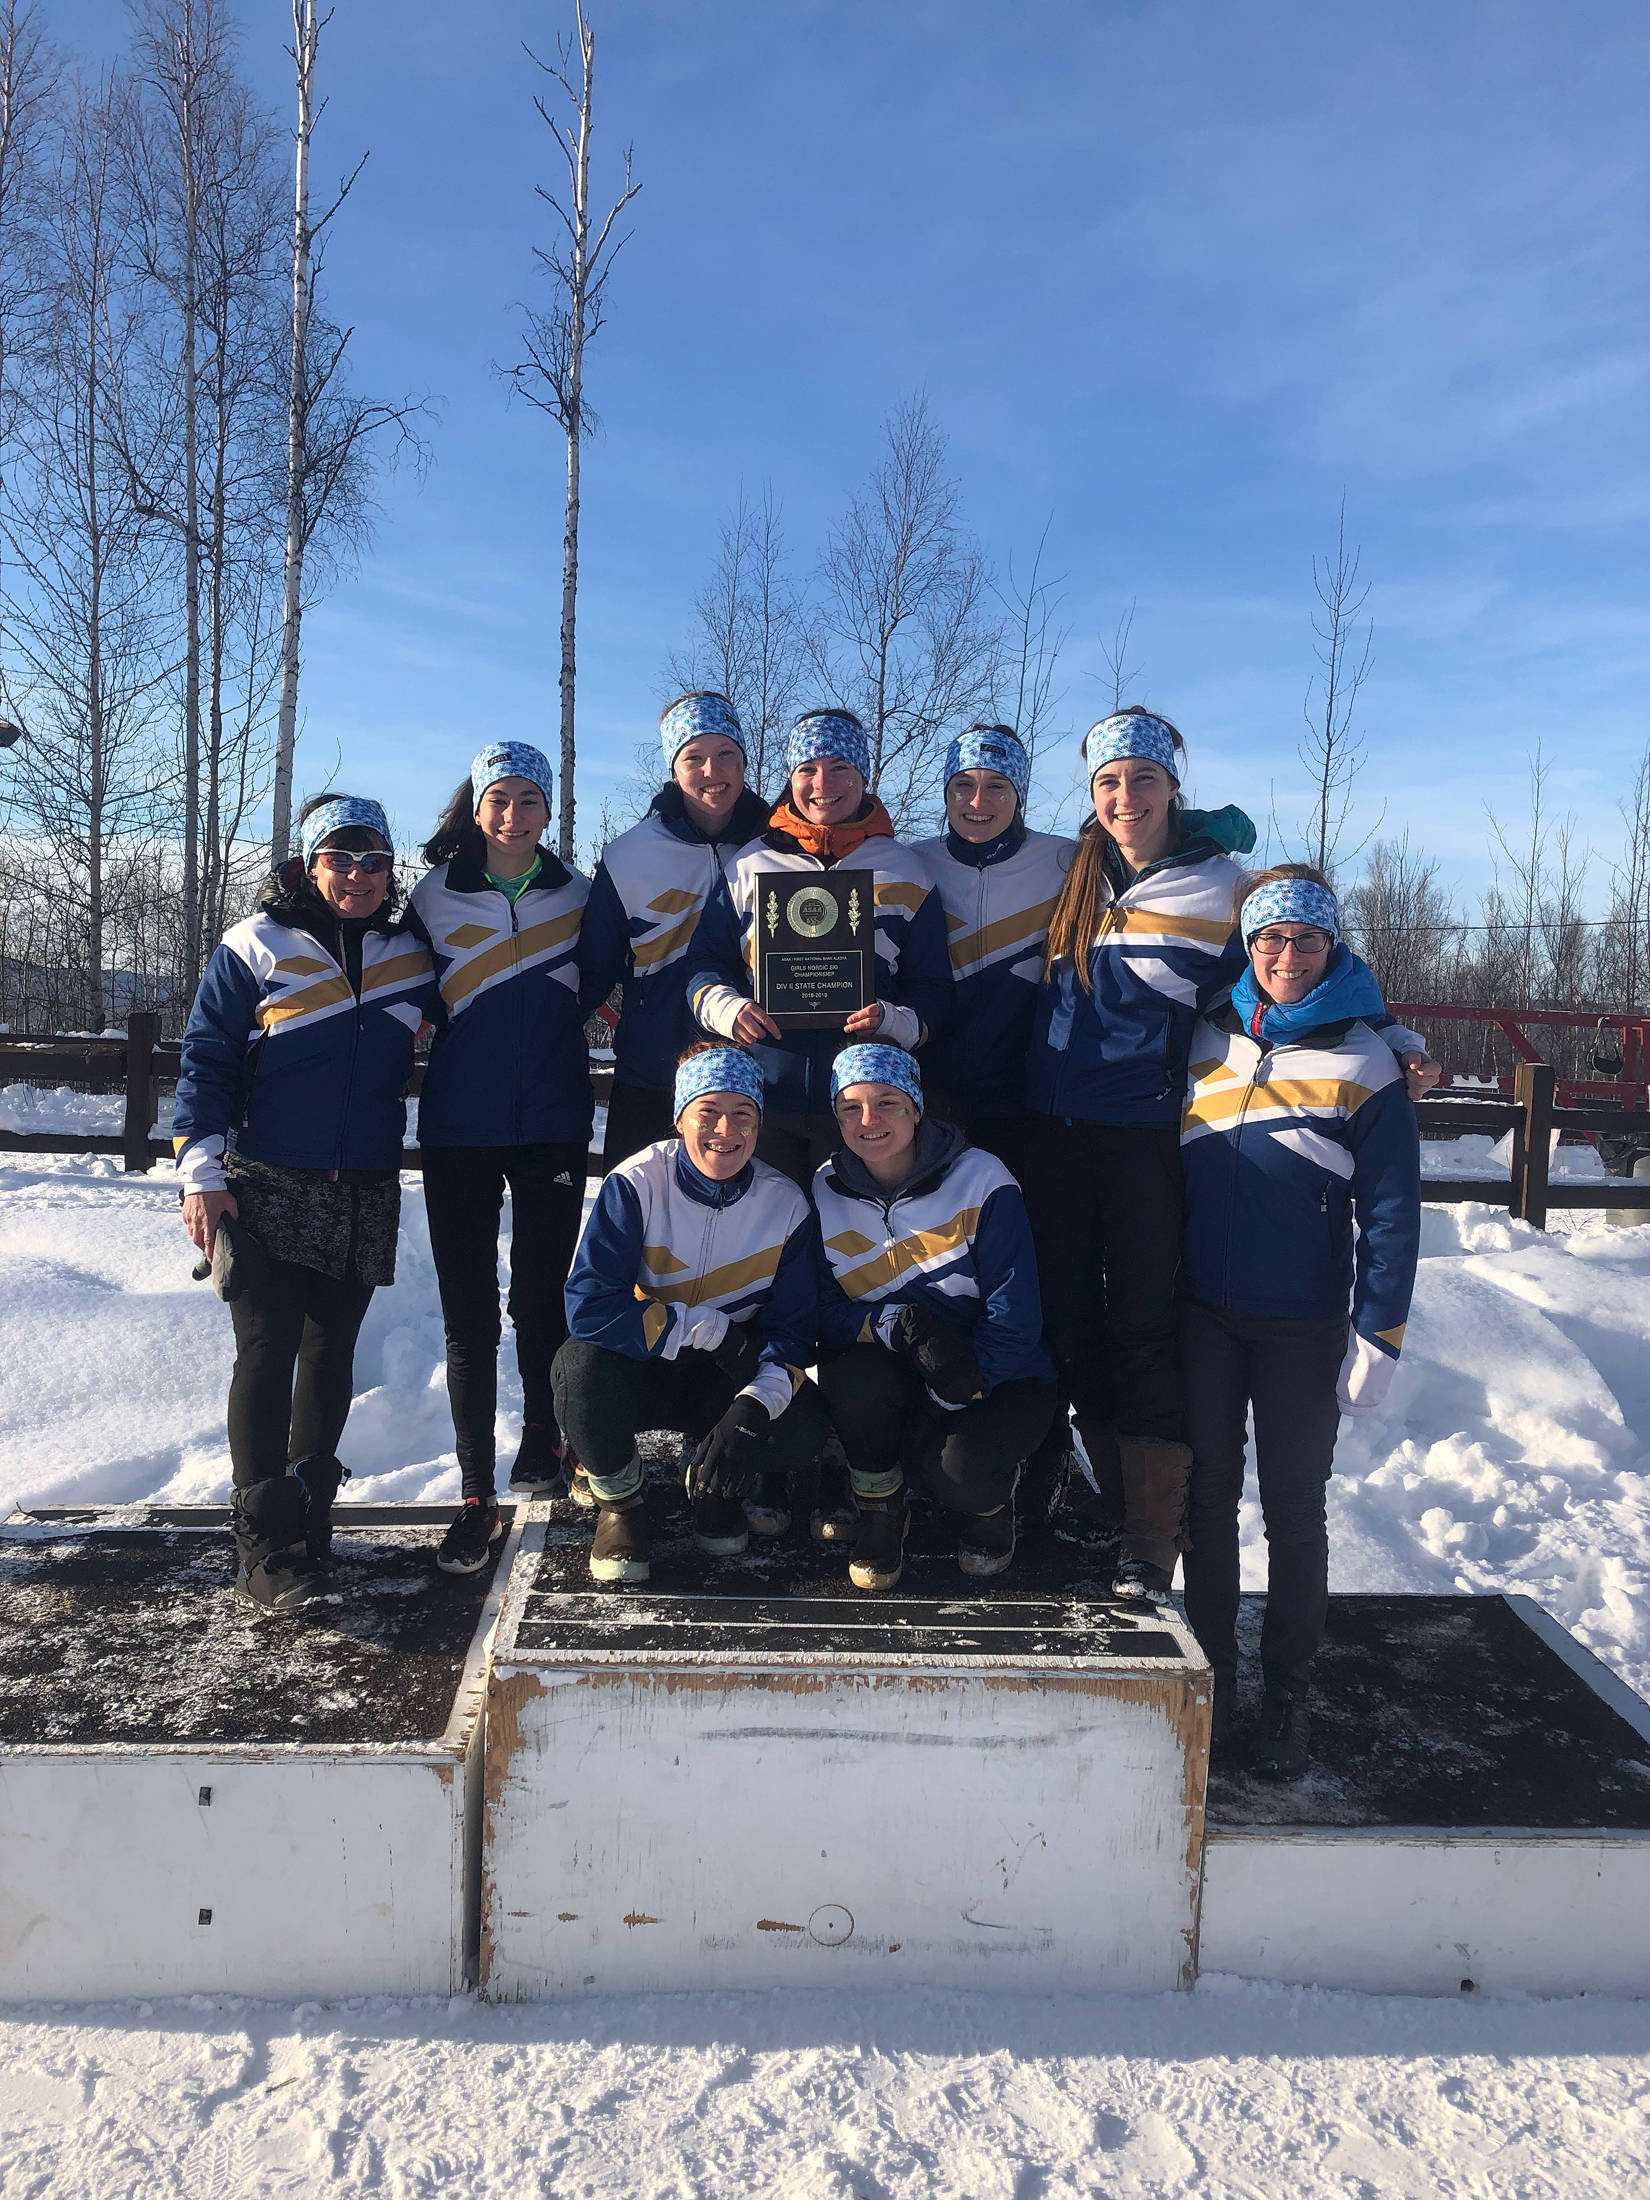 Members of the Homer girls cross-country ski team pose with their first place award for the small schools division for the state skiing championship meet held in Fairbanks, Alaska the weekend of Feb. 22-23, 2019. (Photo courtesy Alison O’Hara)